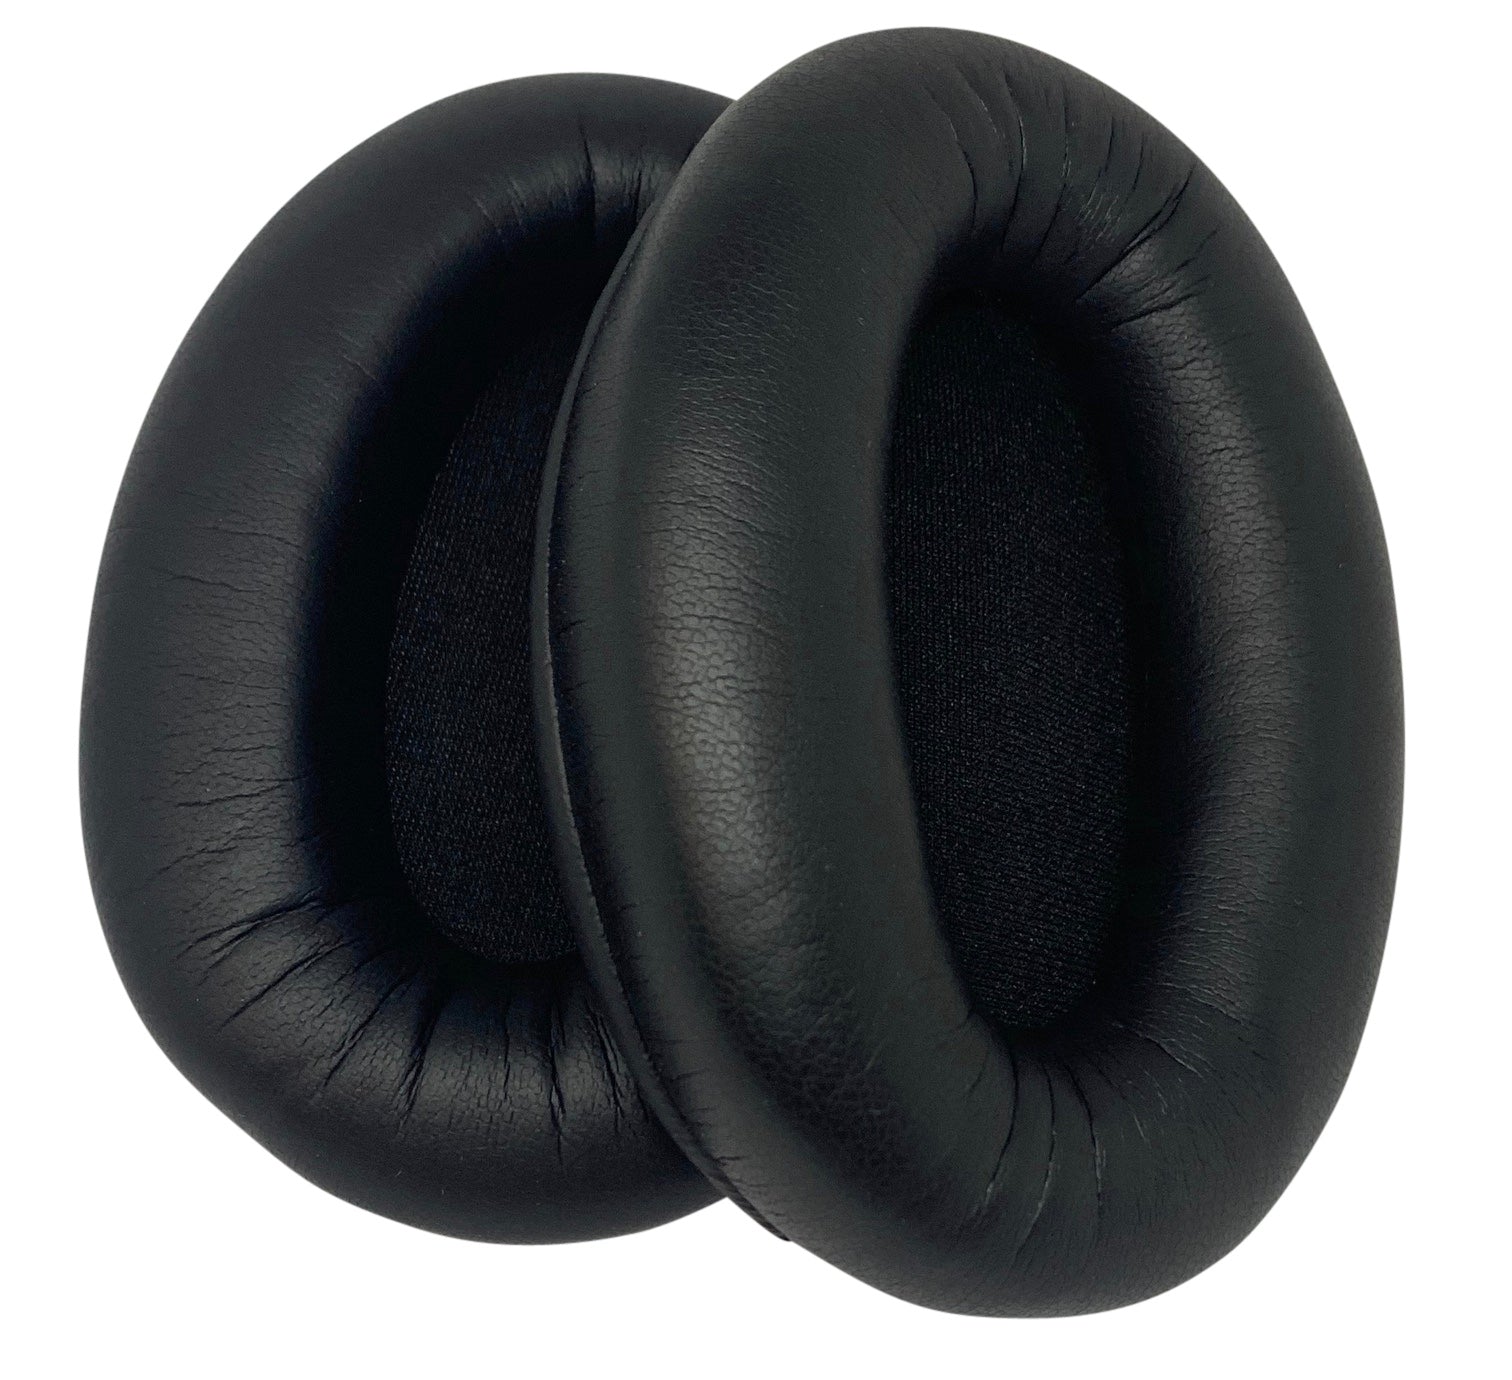 Pair Replacement Ear Pad Cushions Parts for Sony WH-1000XM3 ...